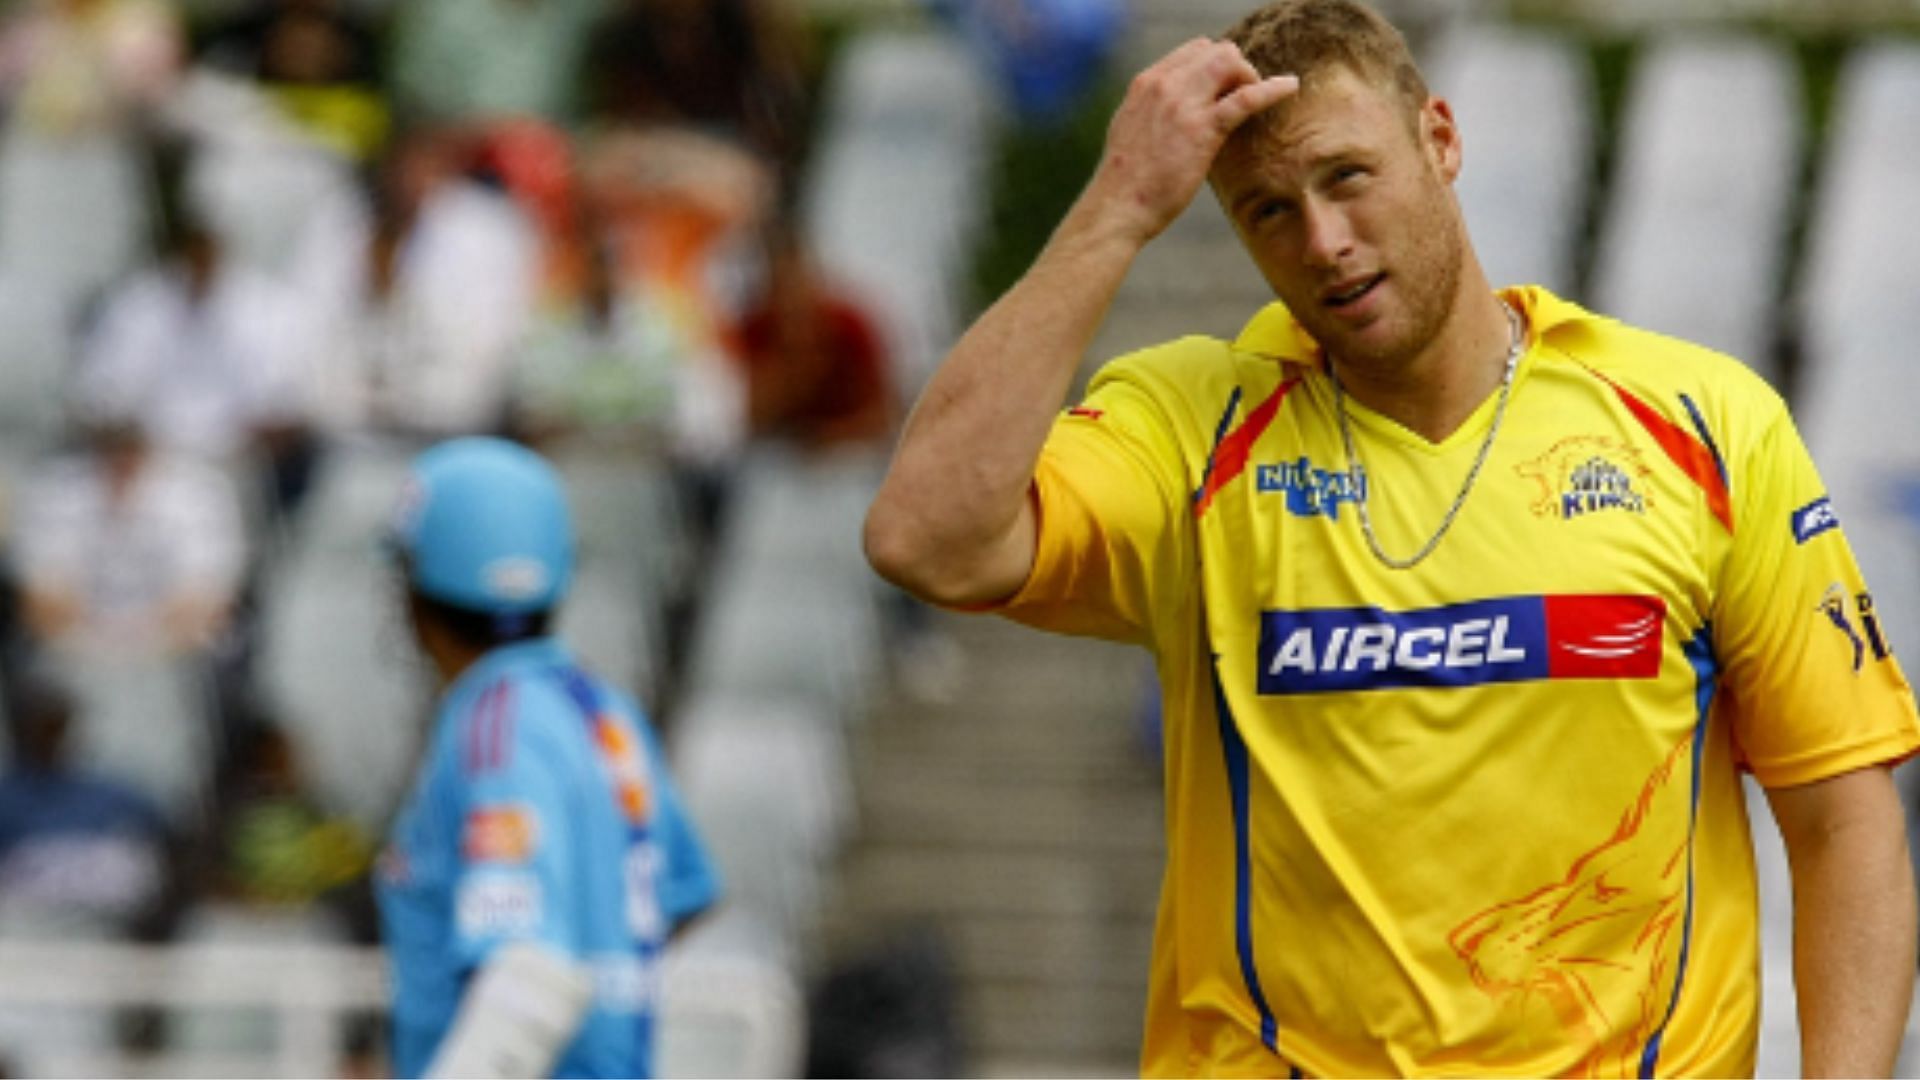 Flintoff was a marquee signing for CSK ahead of the 2009 edition.